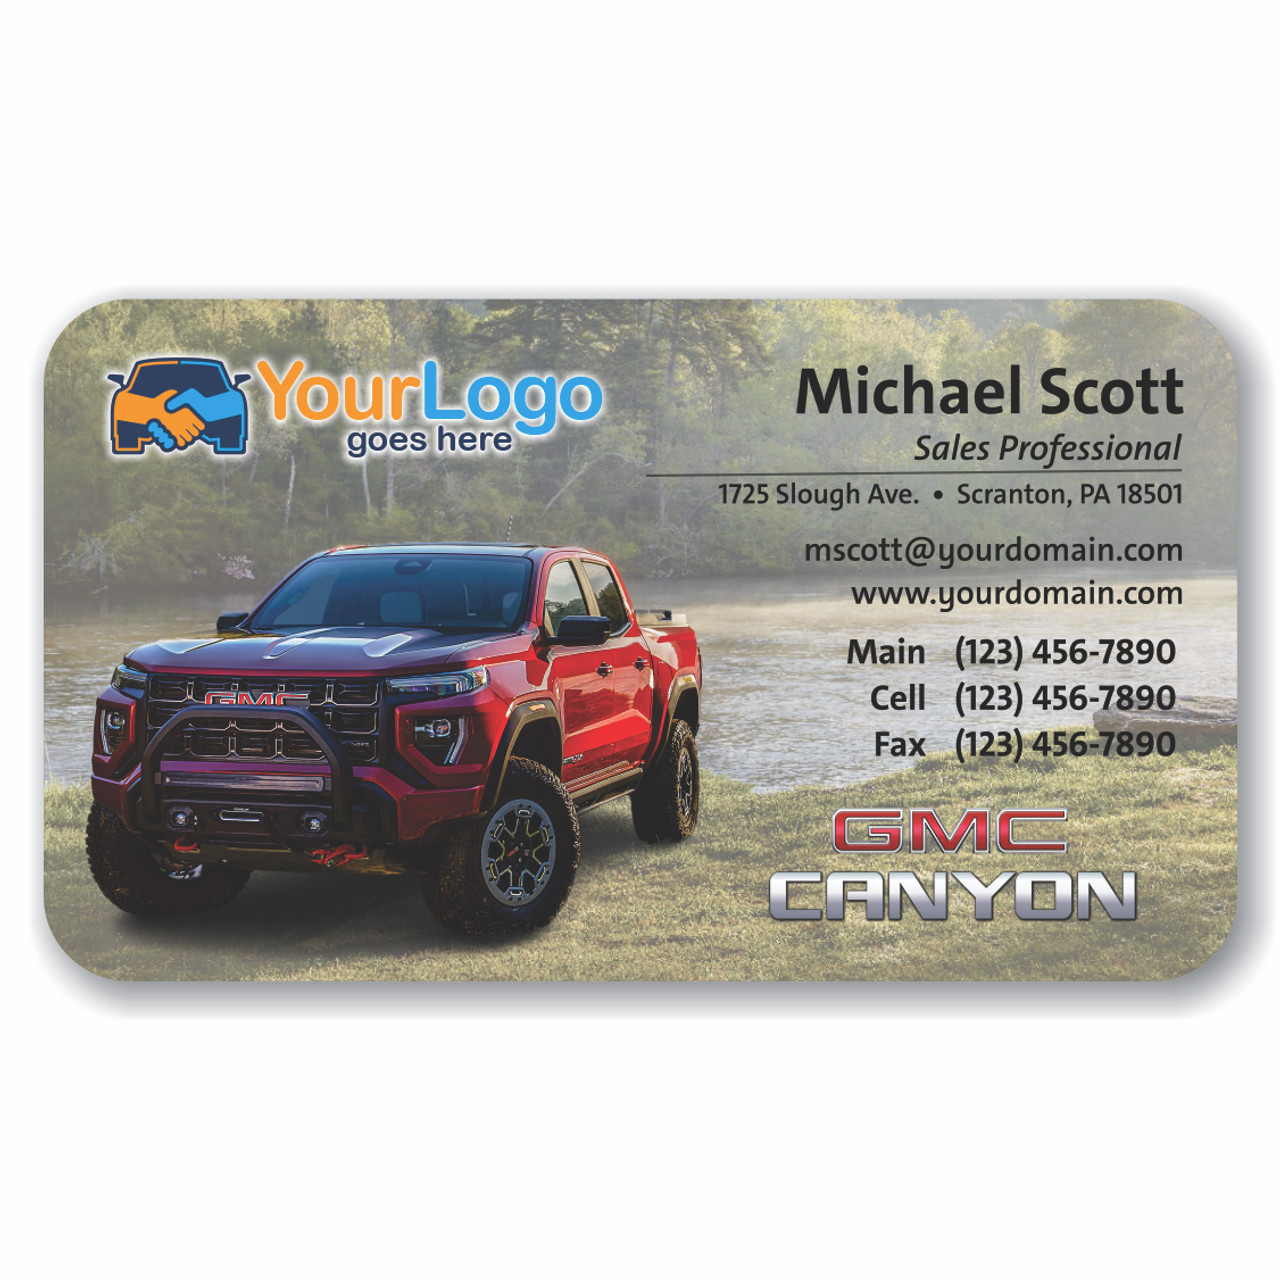 GMC Canyon 03 Business Cards